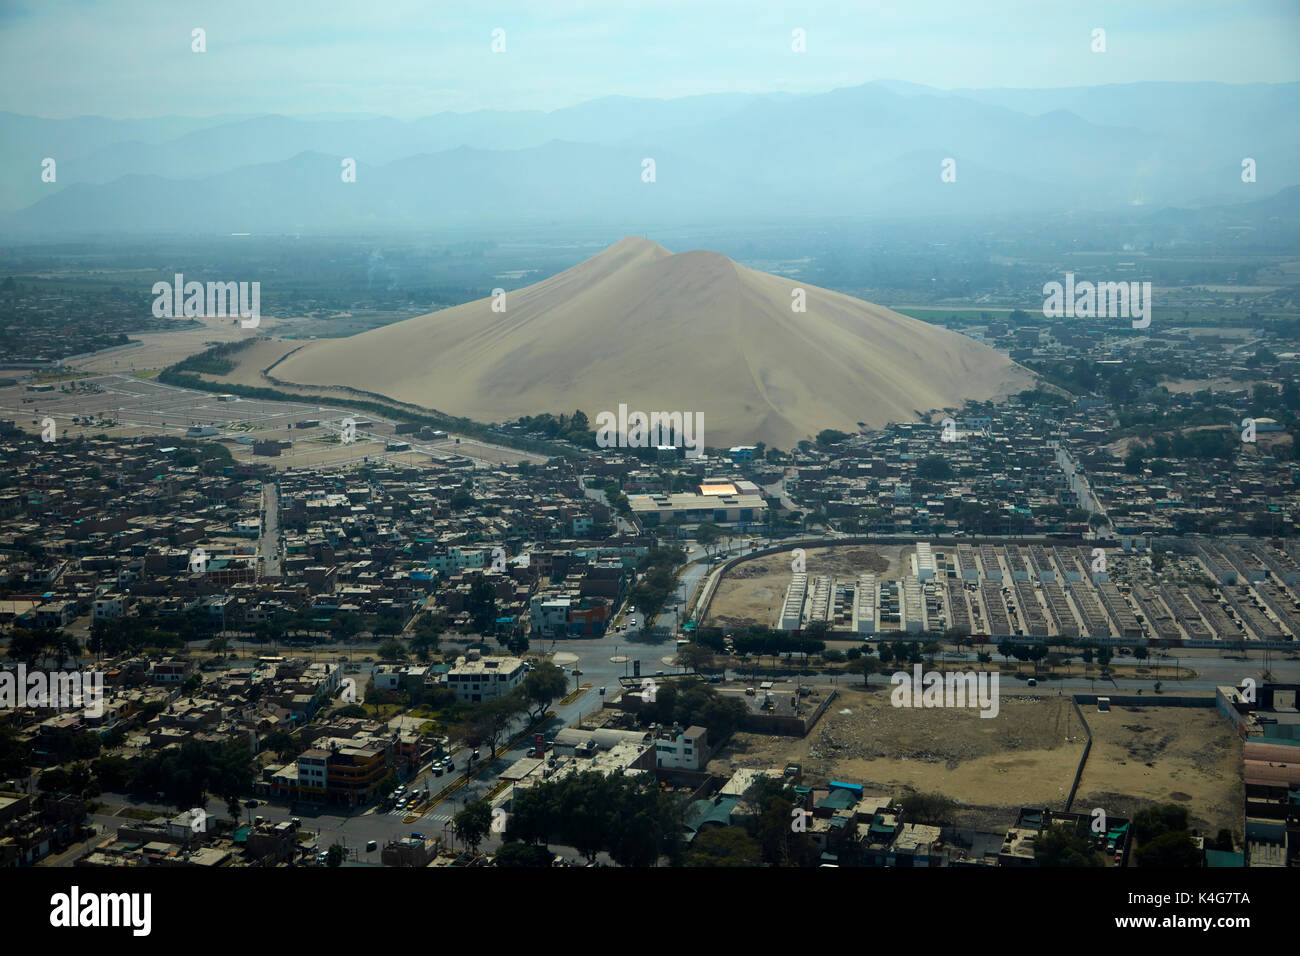 Cerro Saraja, giant sand dune in the middle of Ica City, Peru, South America - aerial Stock Photo